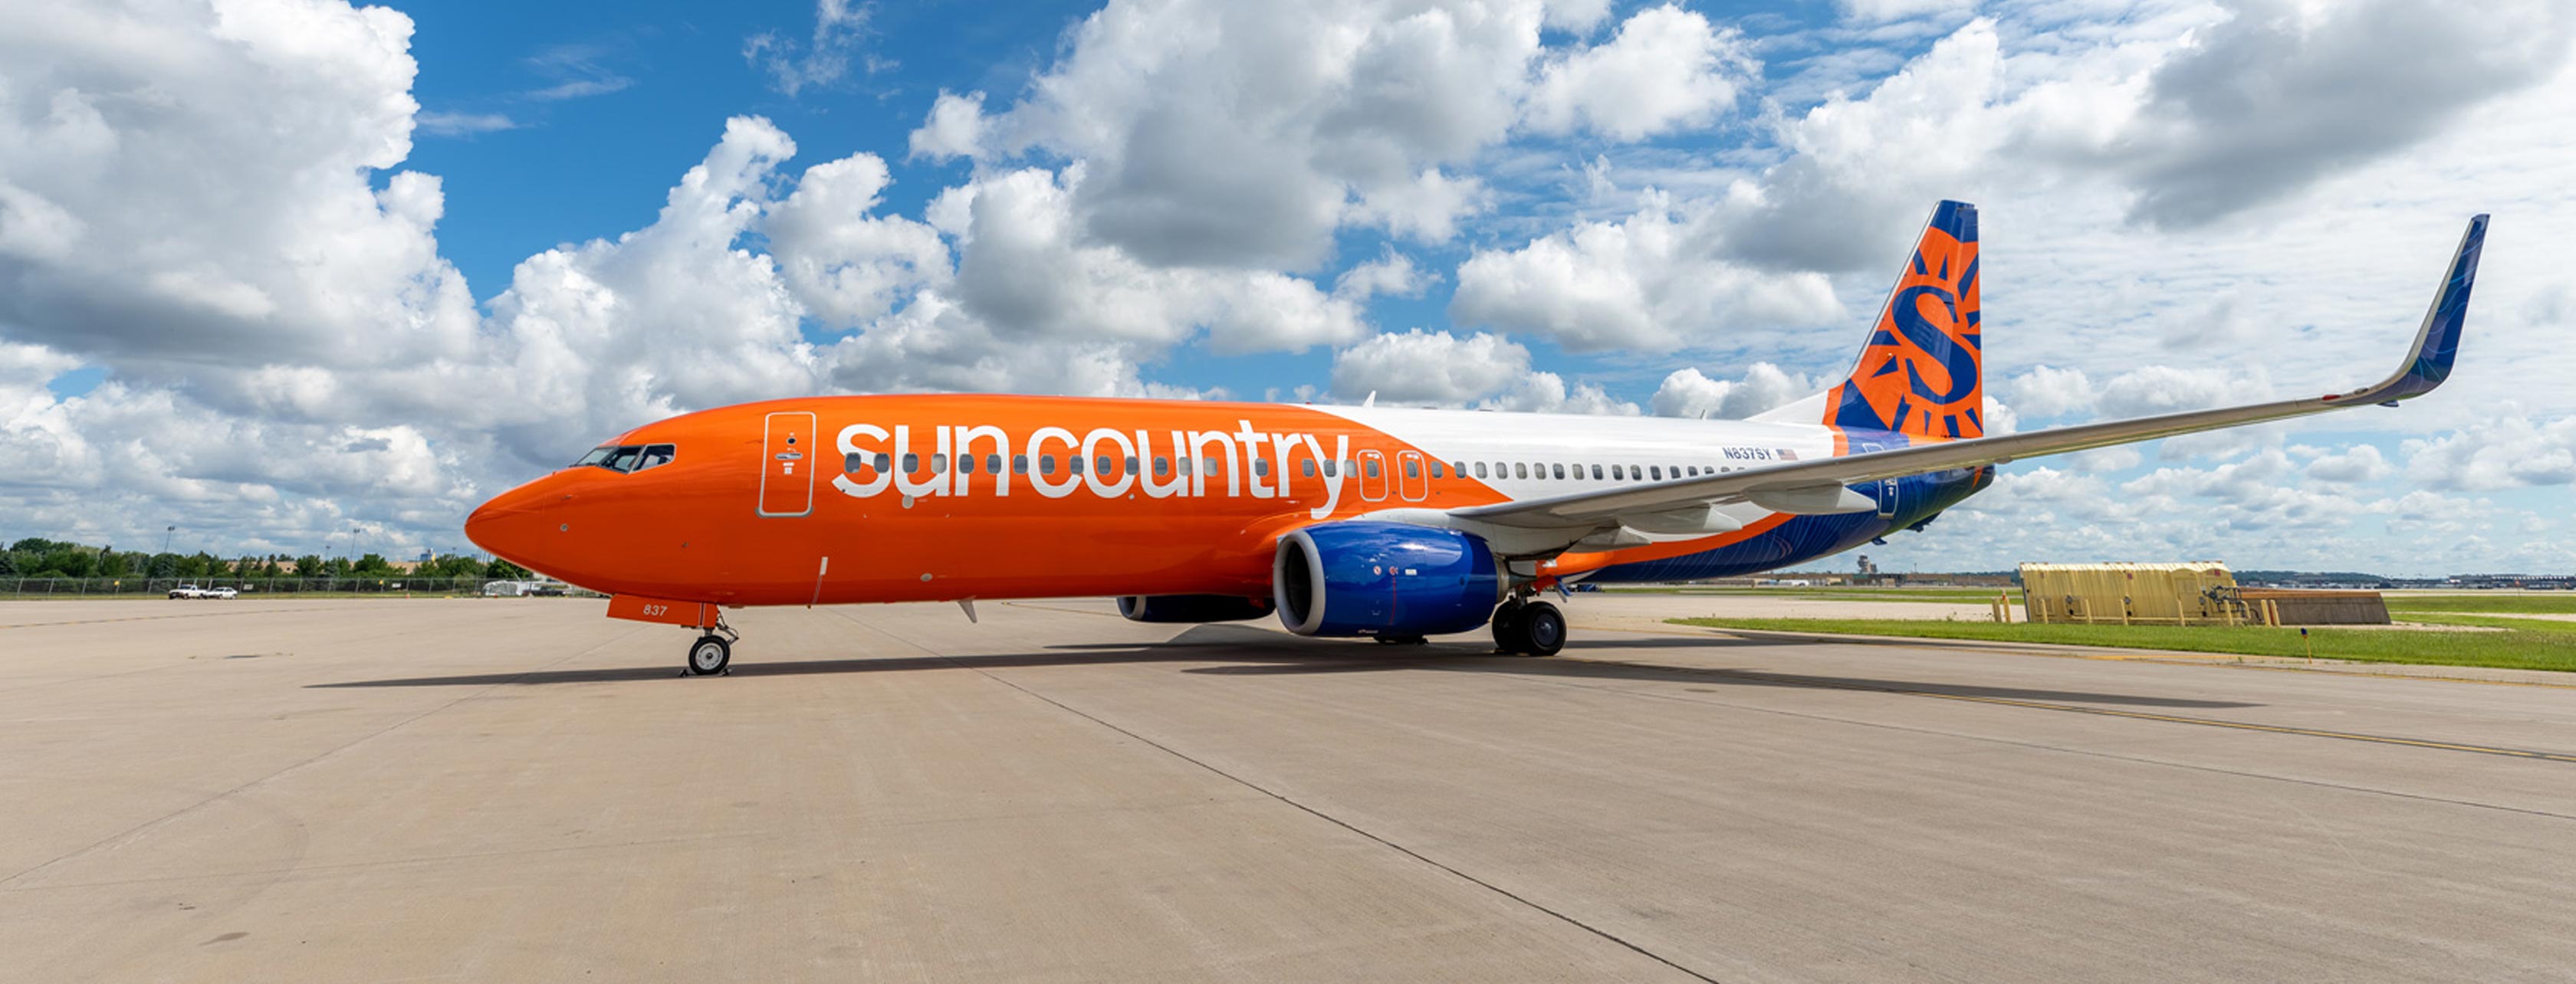 Sun Country Airlines Pilot Direct Program